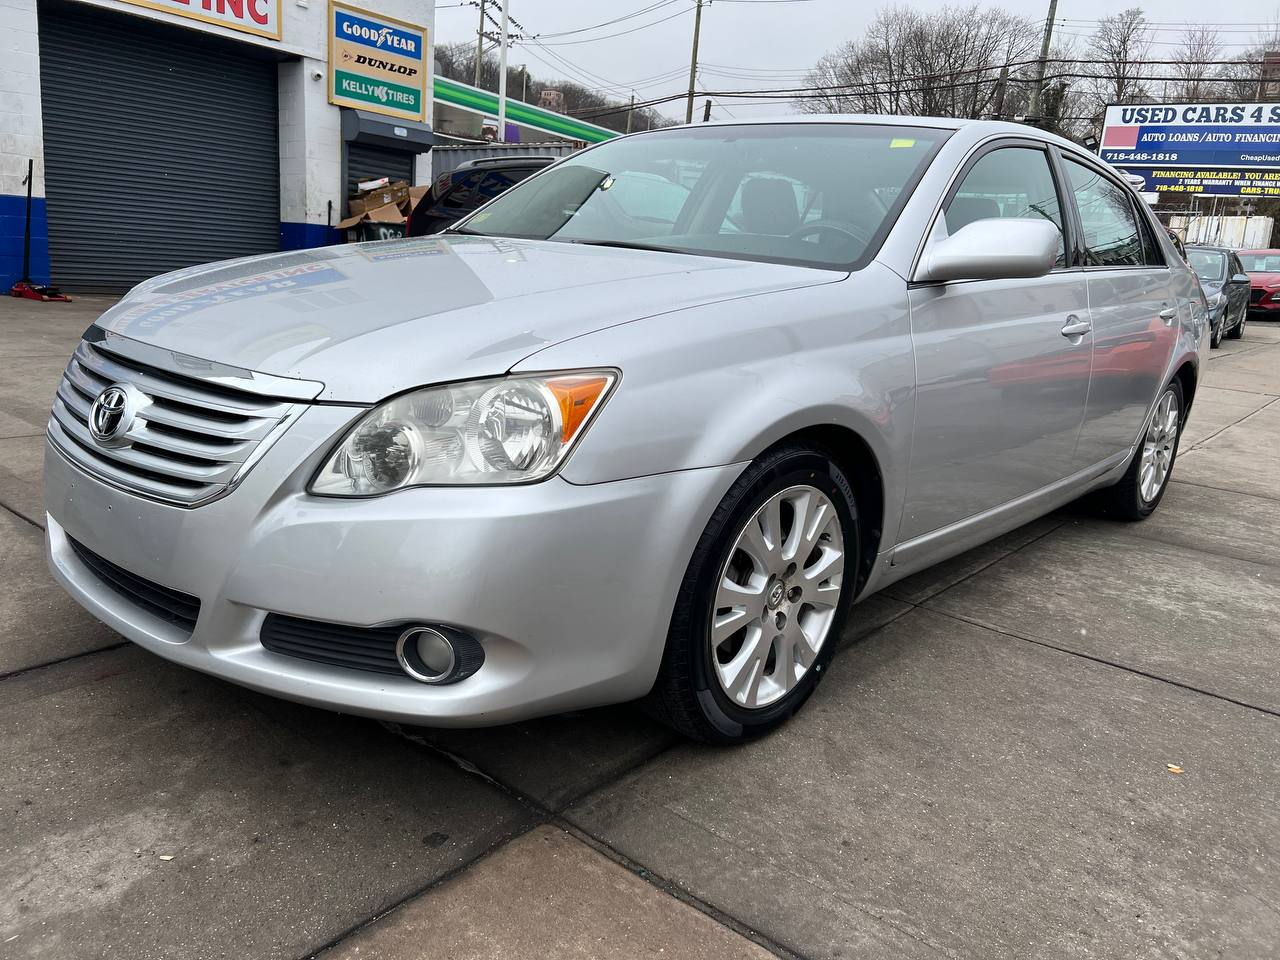 Used Car - 2009 Toyota Avalon XLS for Sale in Staten Island, NY